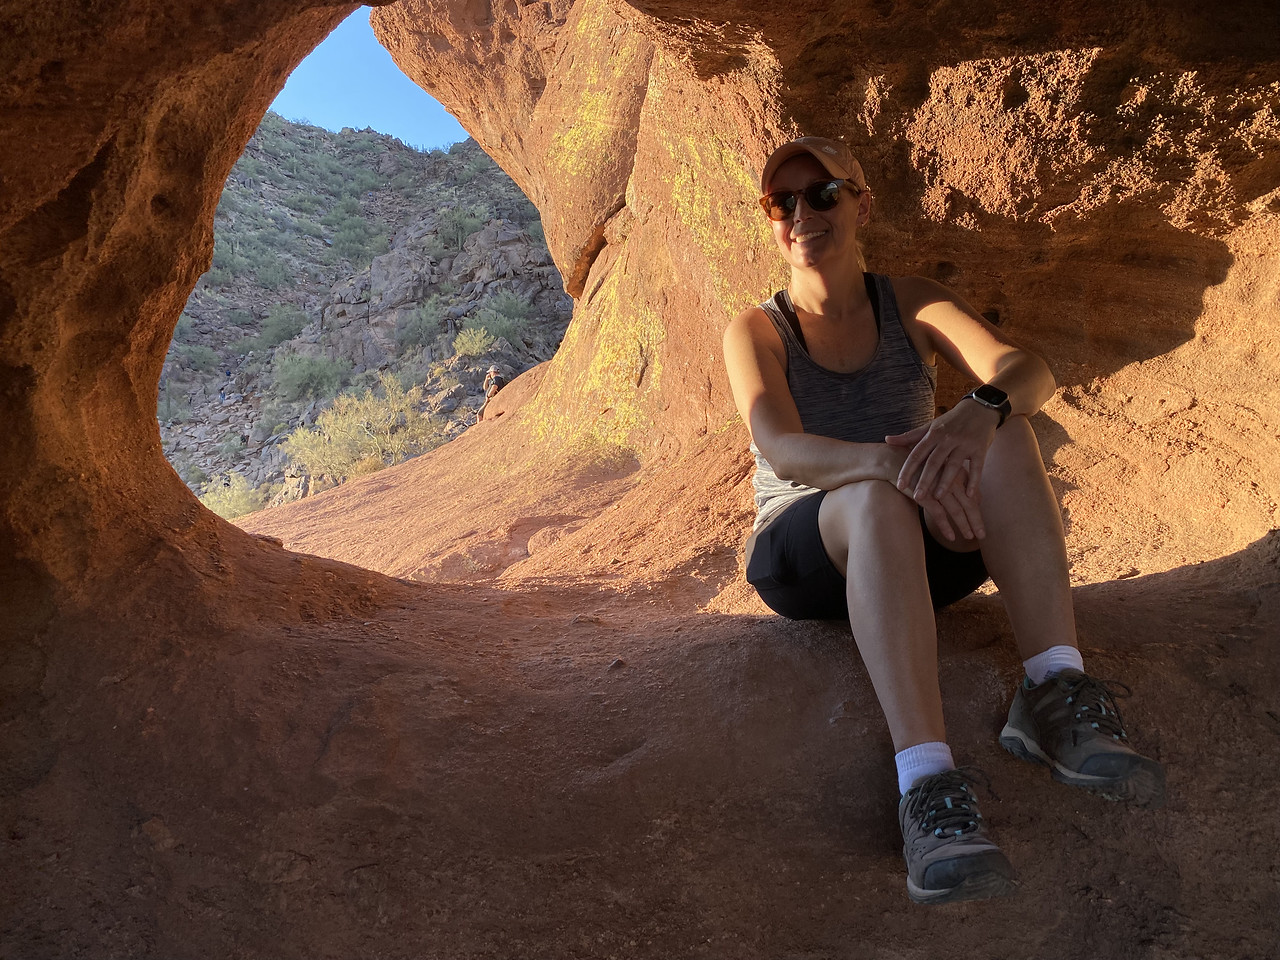 A woman is all smiles while sitting down to take a break after finding some shade in a natural tunnel in a rock formation during a Scottsdale hiking tour.